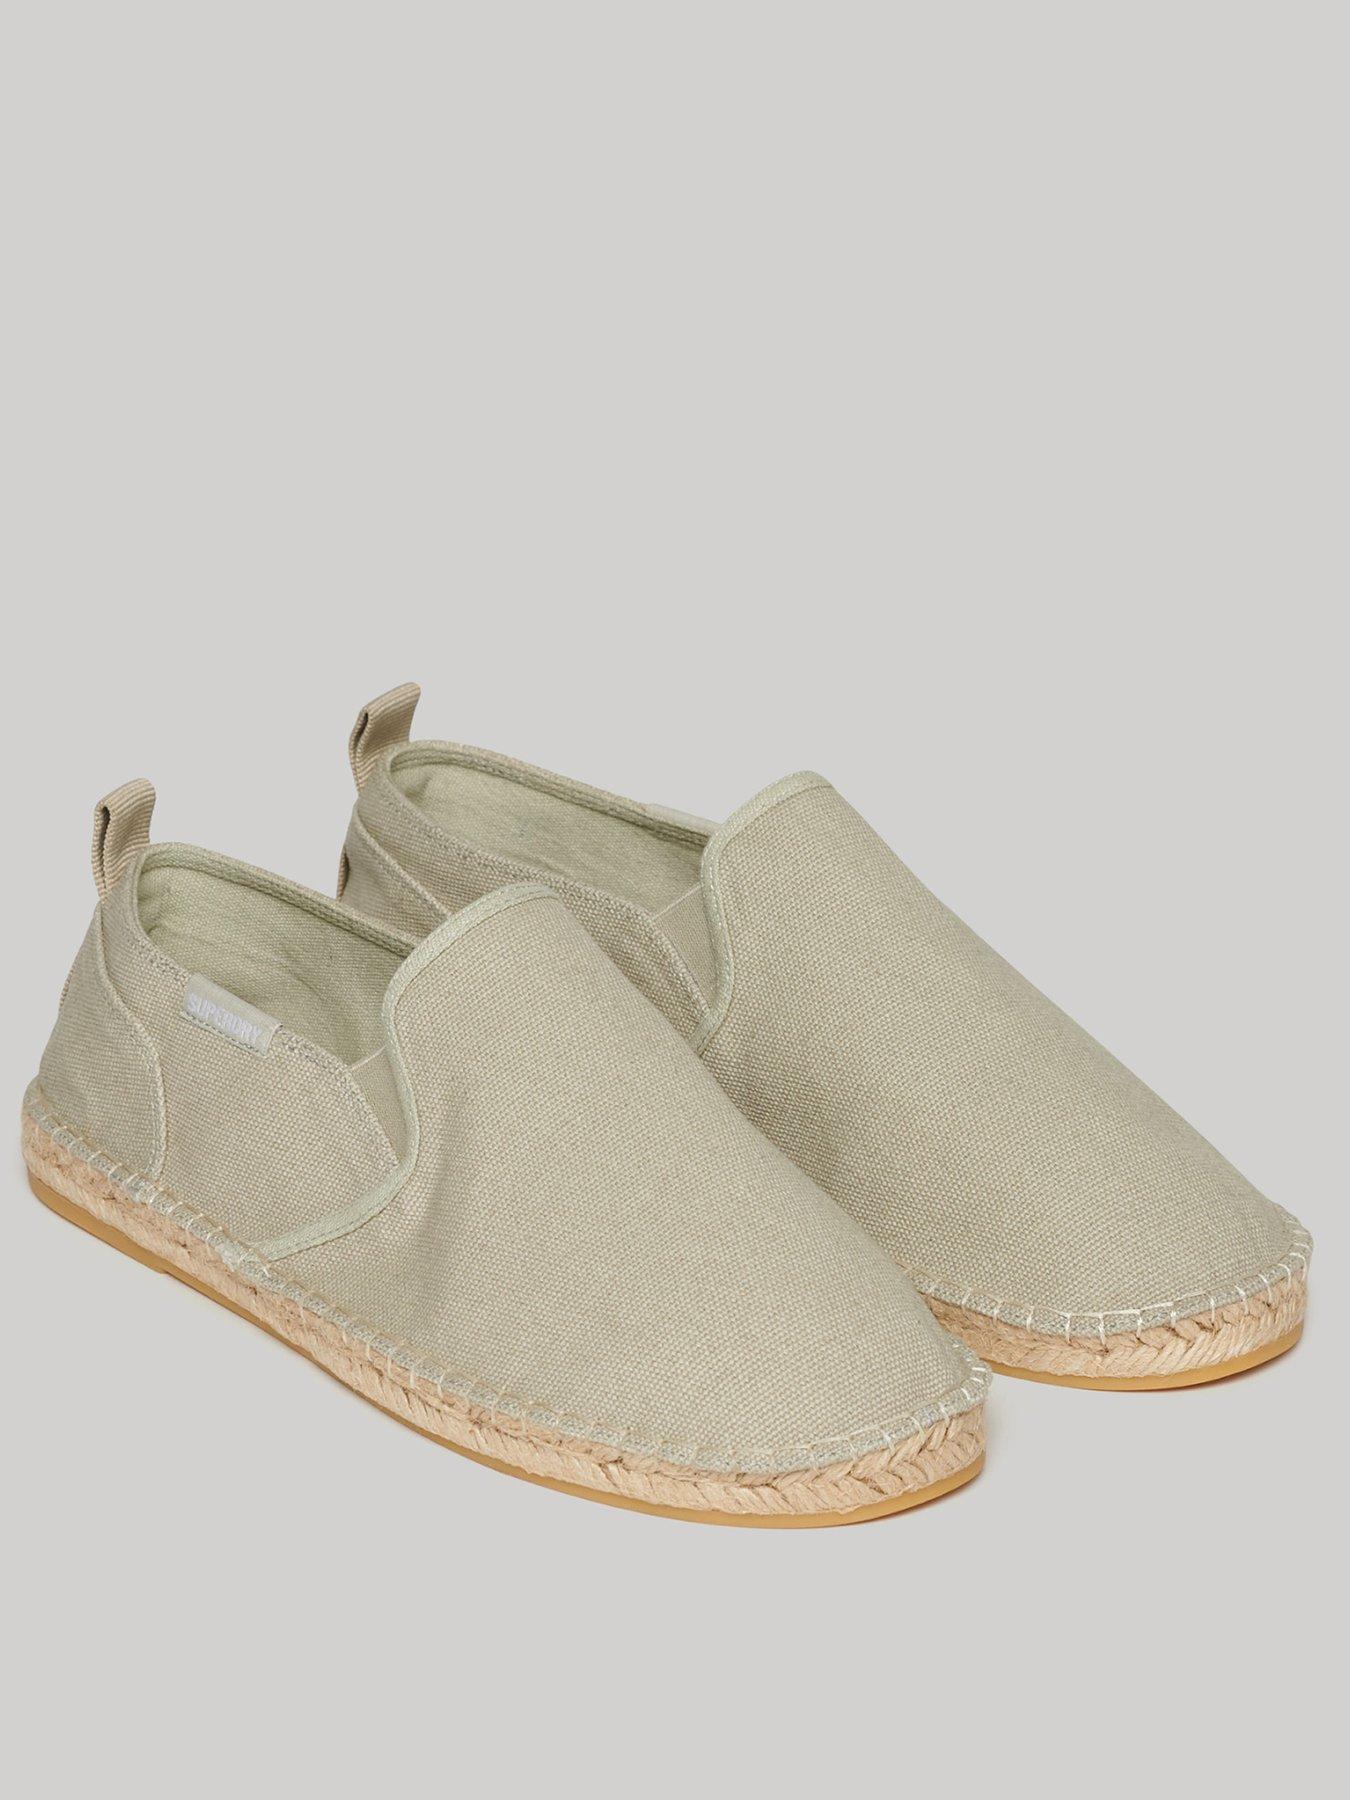 Superdry Canvas Espadrille Shoes - Beige | Very.co.uk